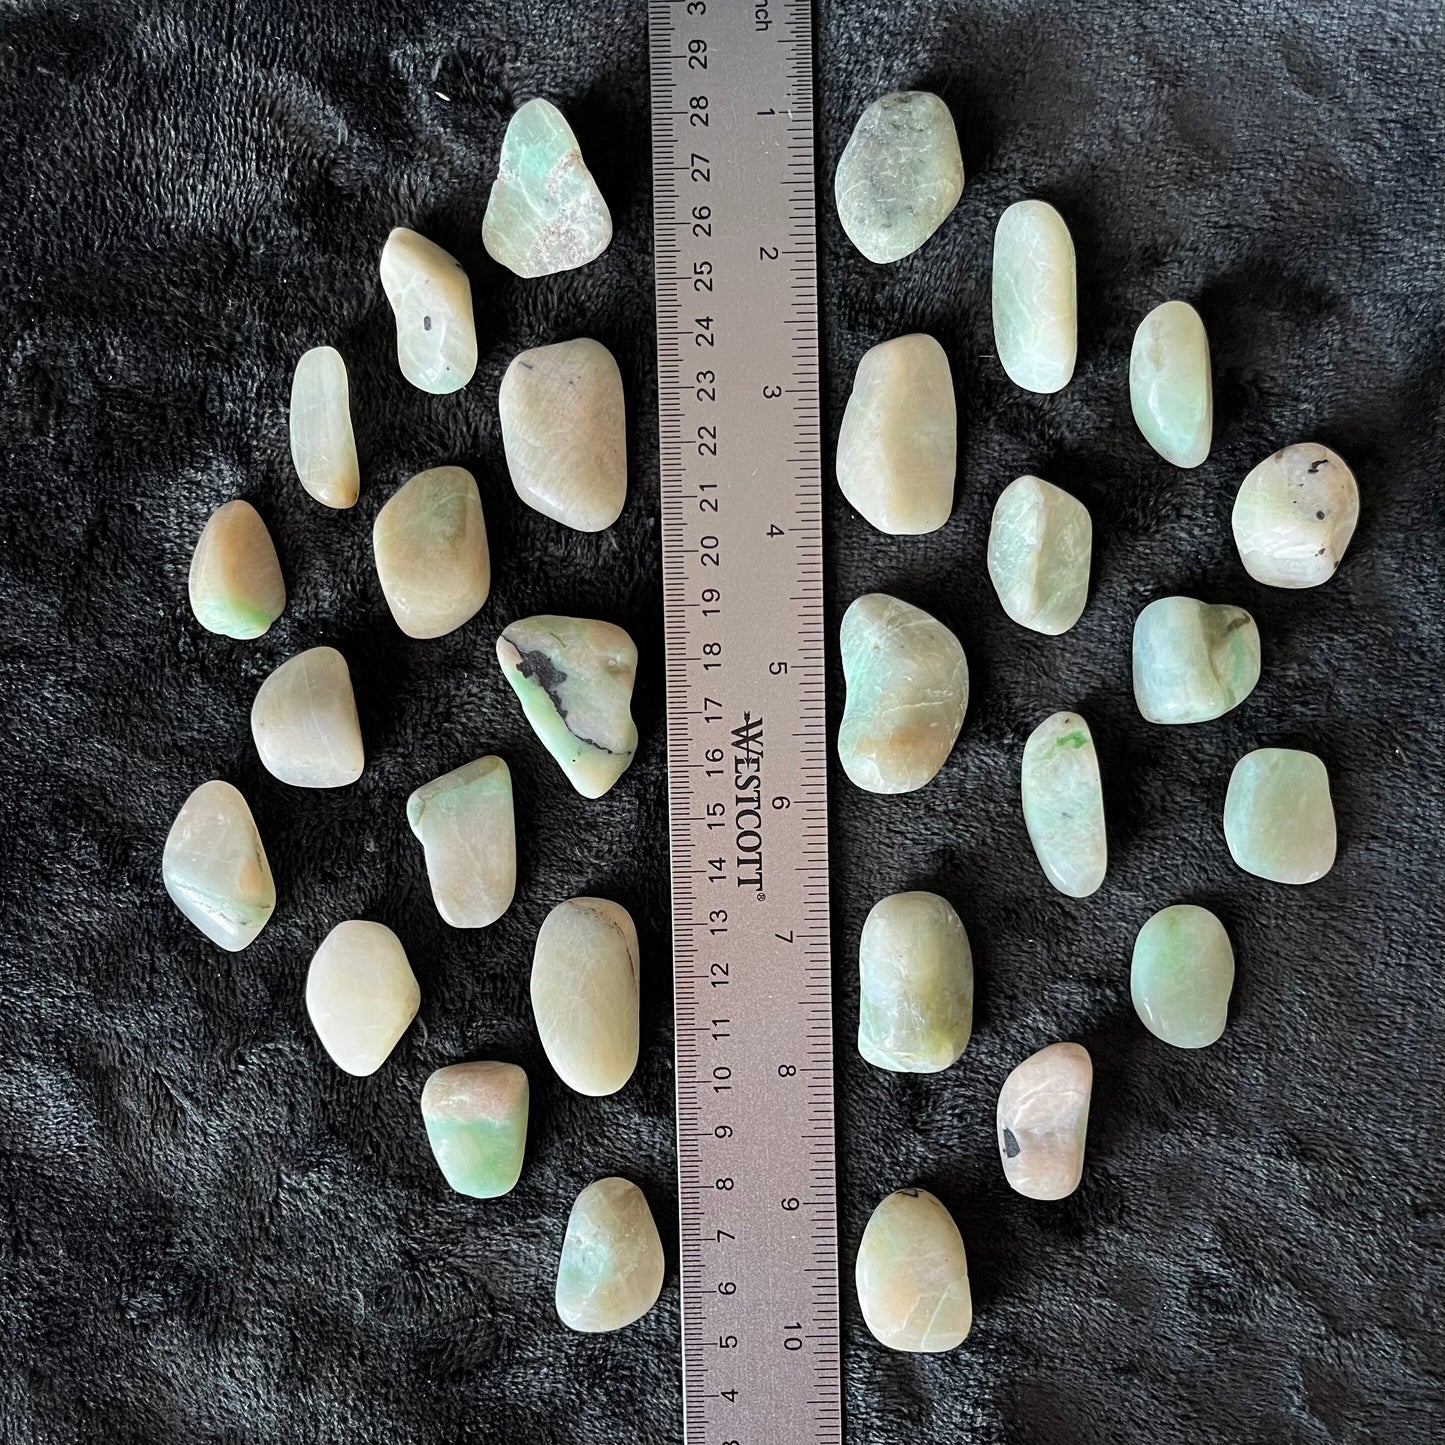 Green Moonstone Tumbled Stone (Approx. 1" - 1 5/8”) 1523